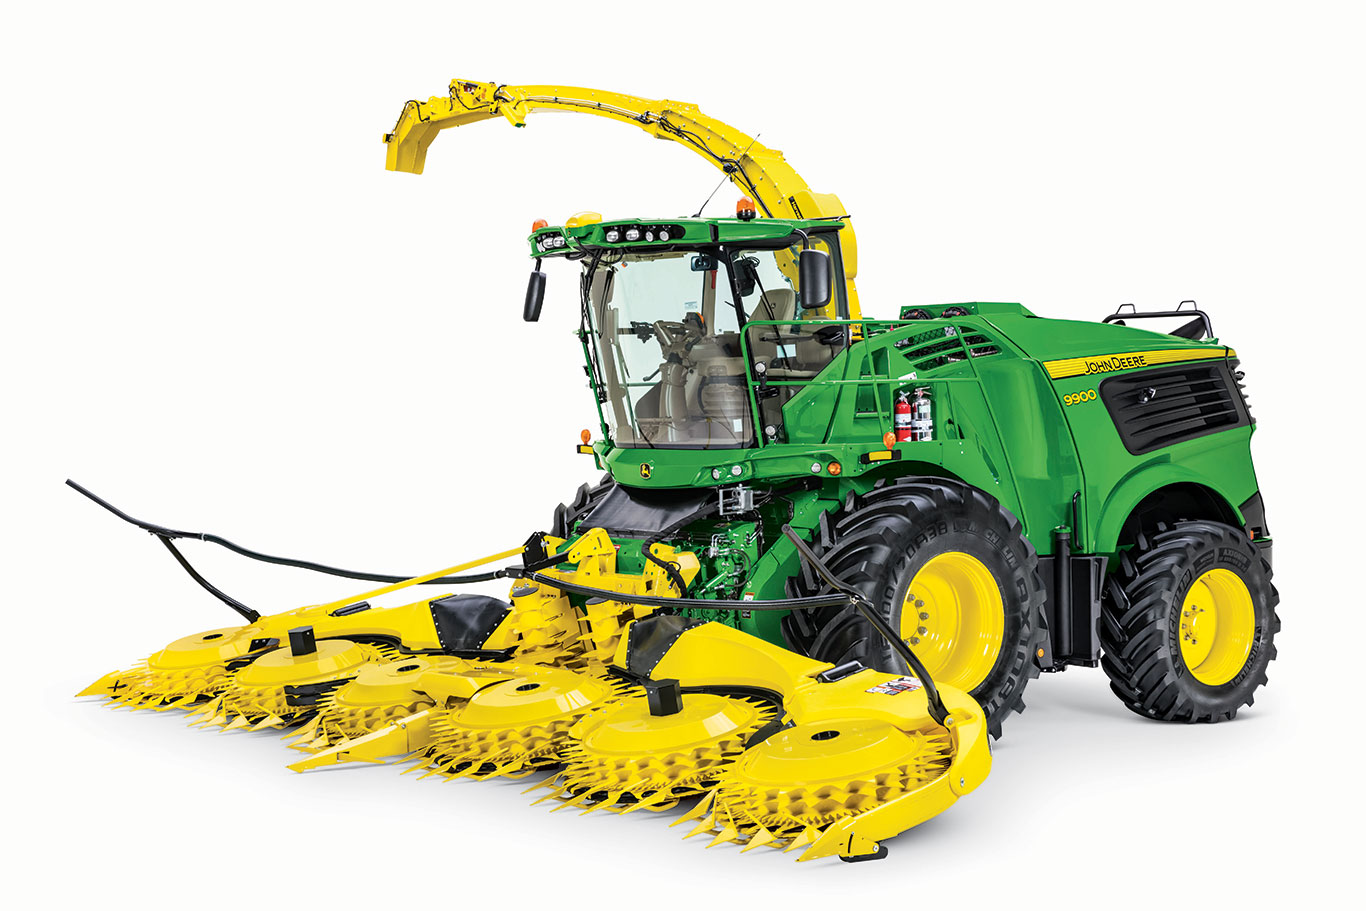 Compared to its predecessor, the 9000 Series is 10 percent more productive per horsepower